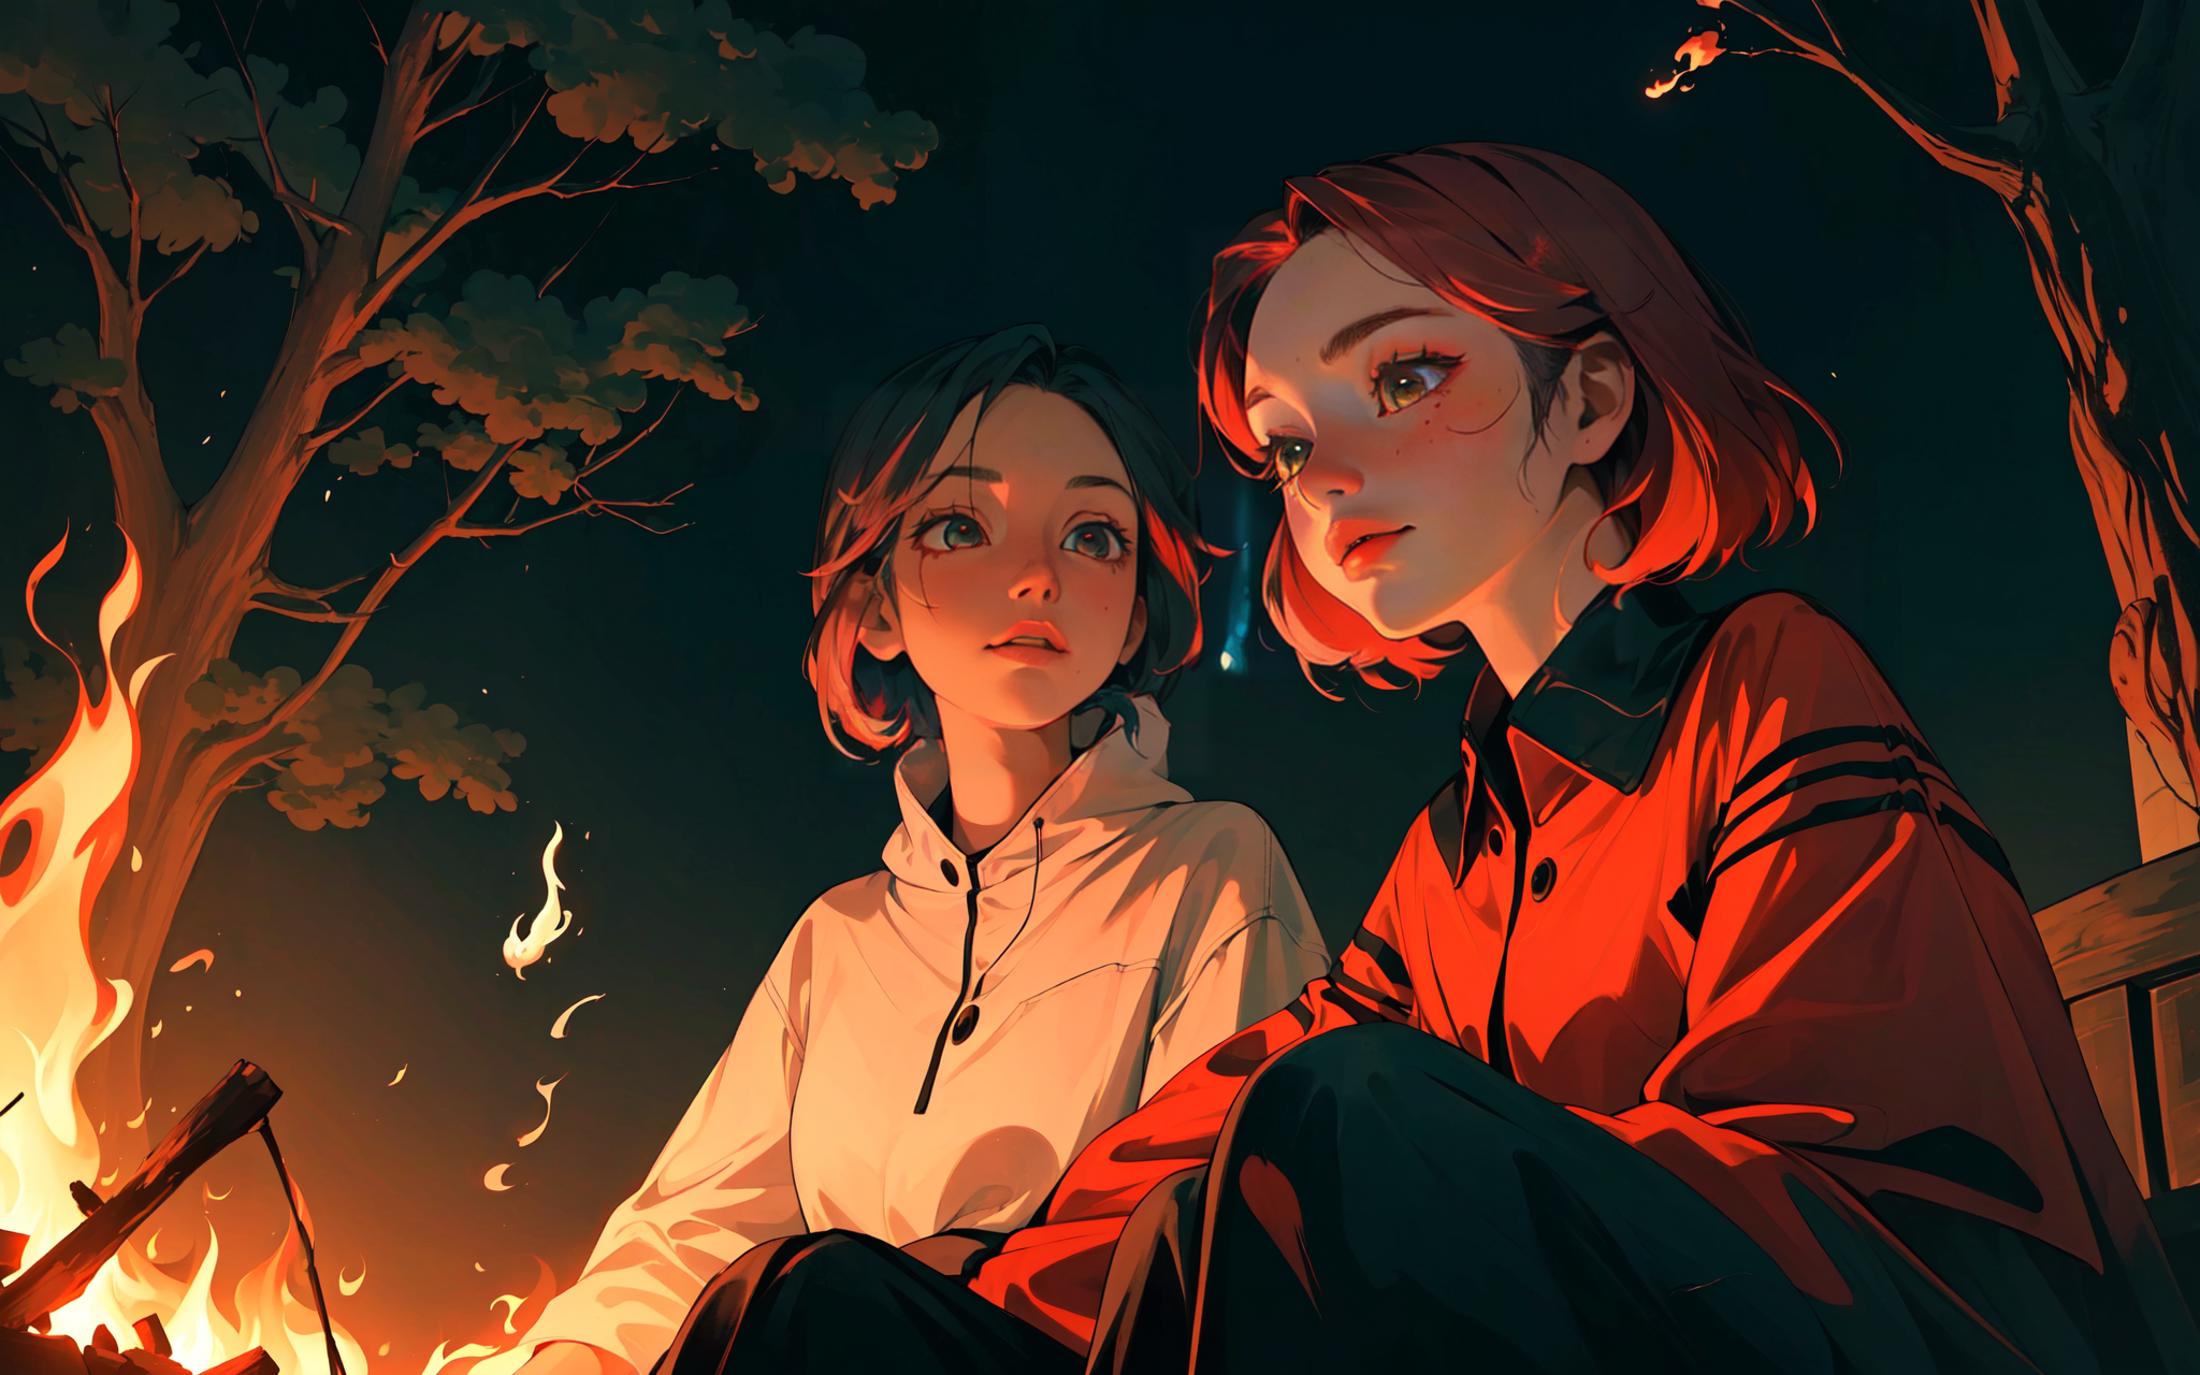 Two girls sitting together in a dark setting with a fire in the background.